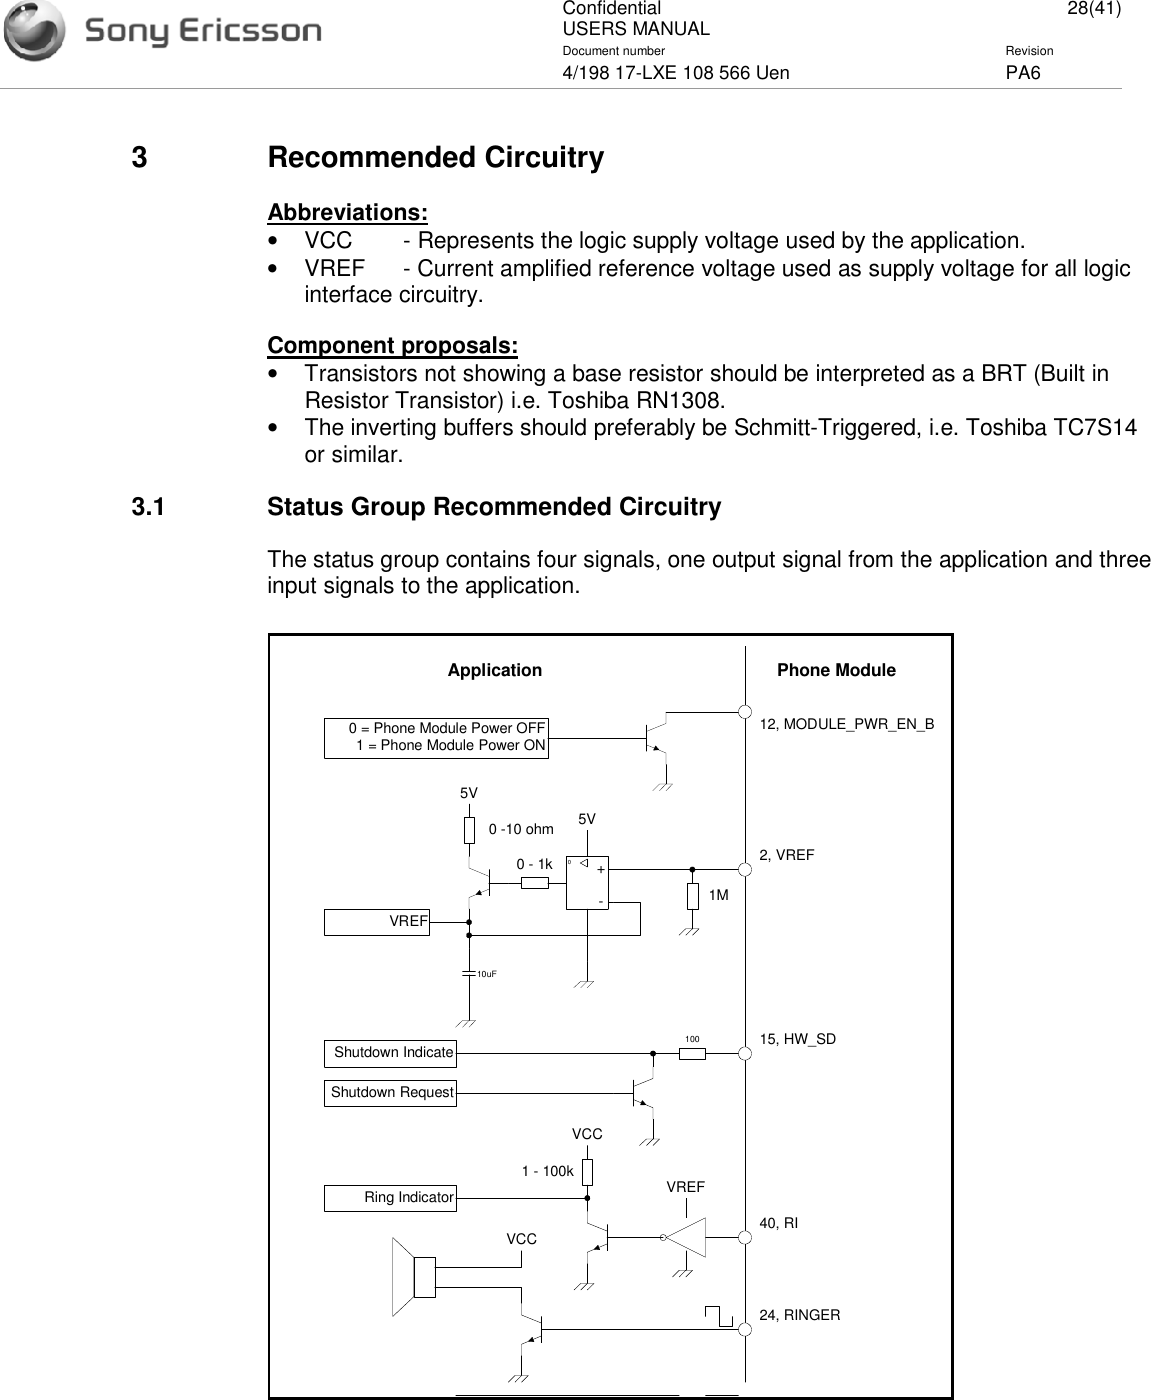 ConfidentialUSERS MANUAL 28(41)Document number Revision4/198 17-LXE 108 566 Uen PA63 Recommended CircuitryAbbreviations:•VCC - Represents the logic supply voltage used by the application.•VREF - Current amplified reference voltage used as supply voltage for all logicinterface circuitry.Component proposals:•Transistors not showing a base resistor should be interpreted as a BRT (Built inResistor Transistor) i.e. Toshiba RN1308.•The inverting buffers should preferably be Schmitt-Triggered, i.e. Toshiba TC7S14or similar.3.1 Status Group Recommended CircuitryThe status group contains four signals, one output signal from the application and threeinput signals to the application.Phone ModuleApplication12, MODULE_PWR_EN_B0 = Phone Module Power OFF1 = Phone Module Power ON+-00 - 1k0 -10 ohm5V2, VREF1M10uFVREF5VVREF40, RI1 - 100kVCCRing Indicator24, RINGERVCC15, HW_SD100Shutdown RequestShutdown Indicate